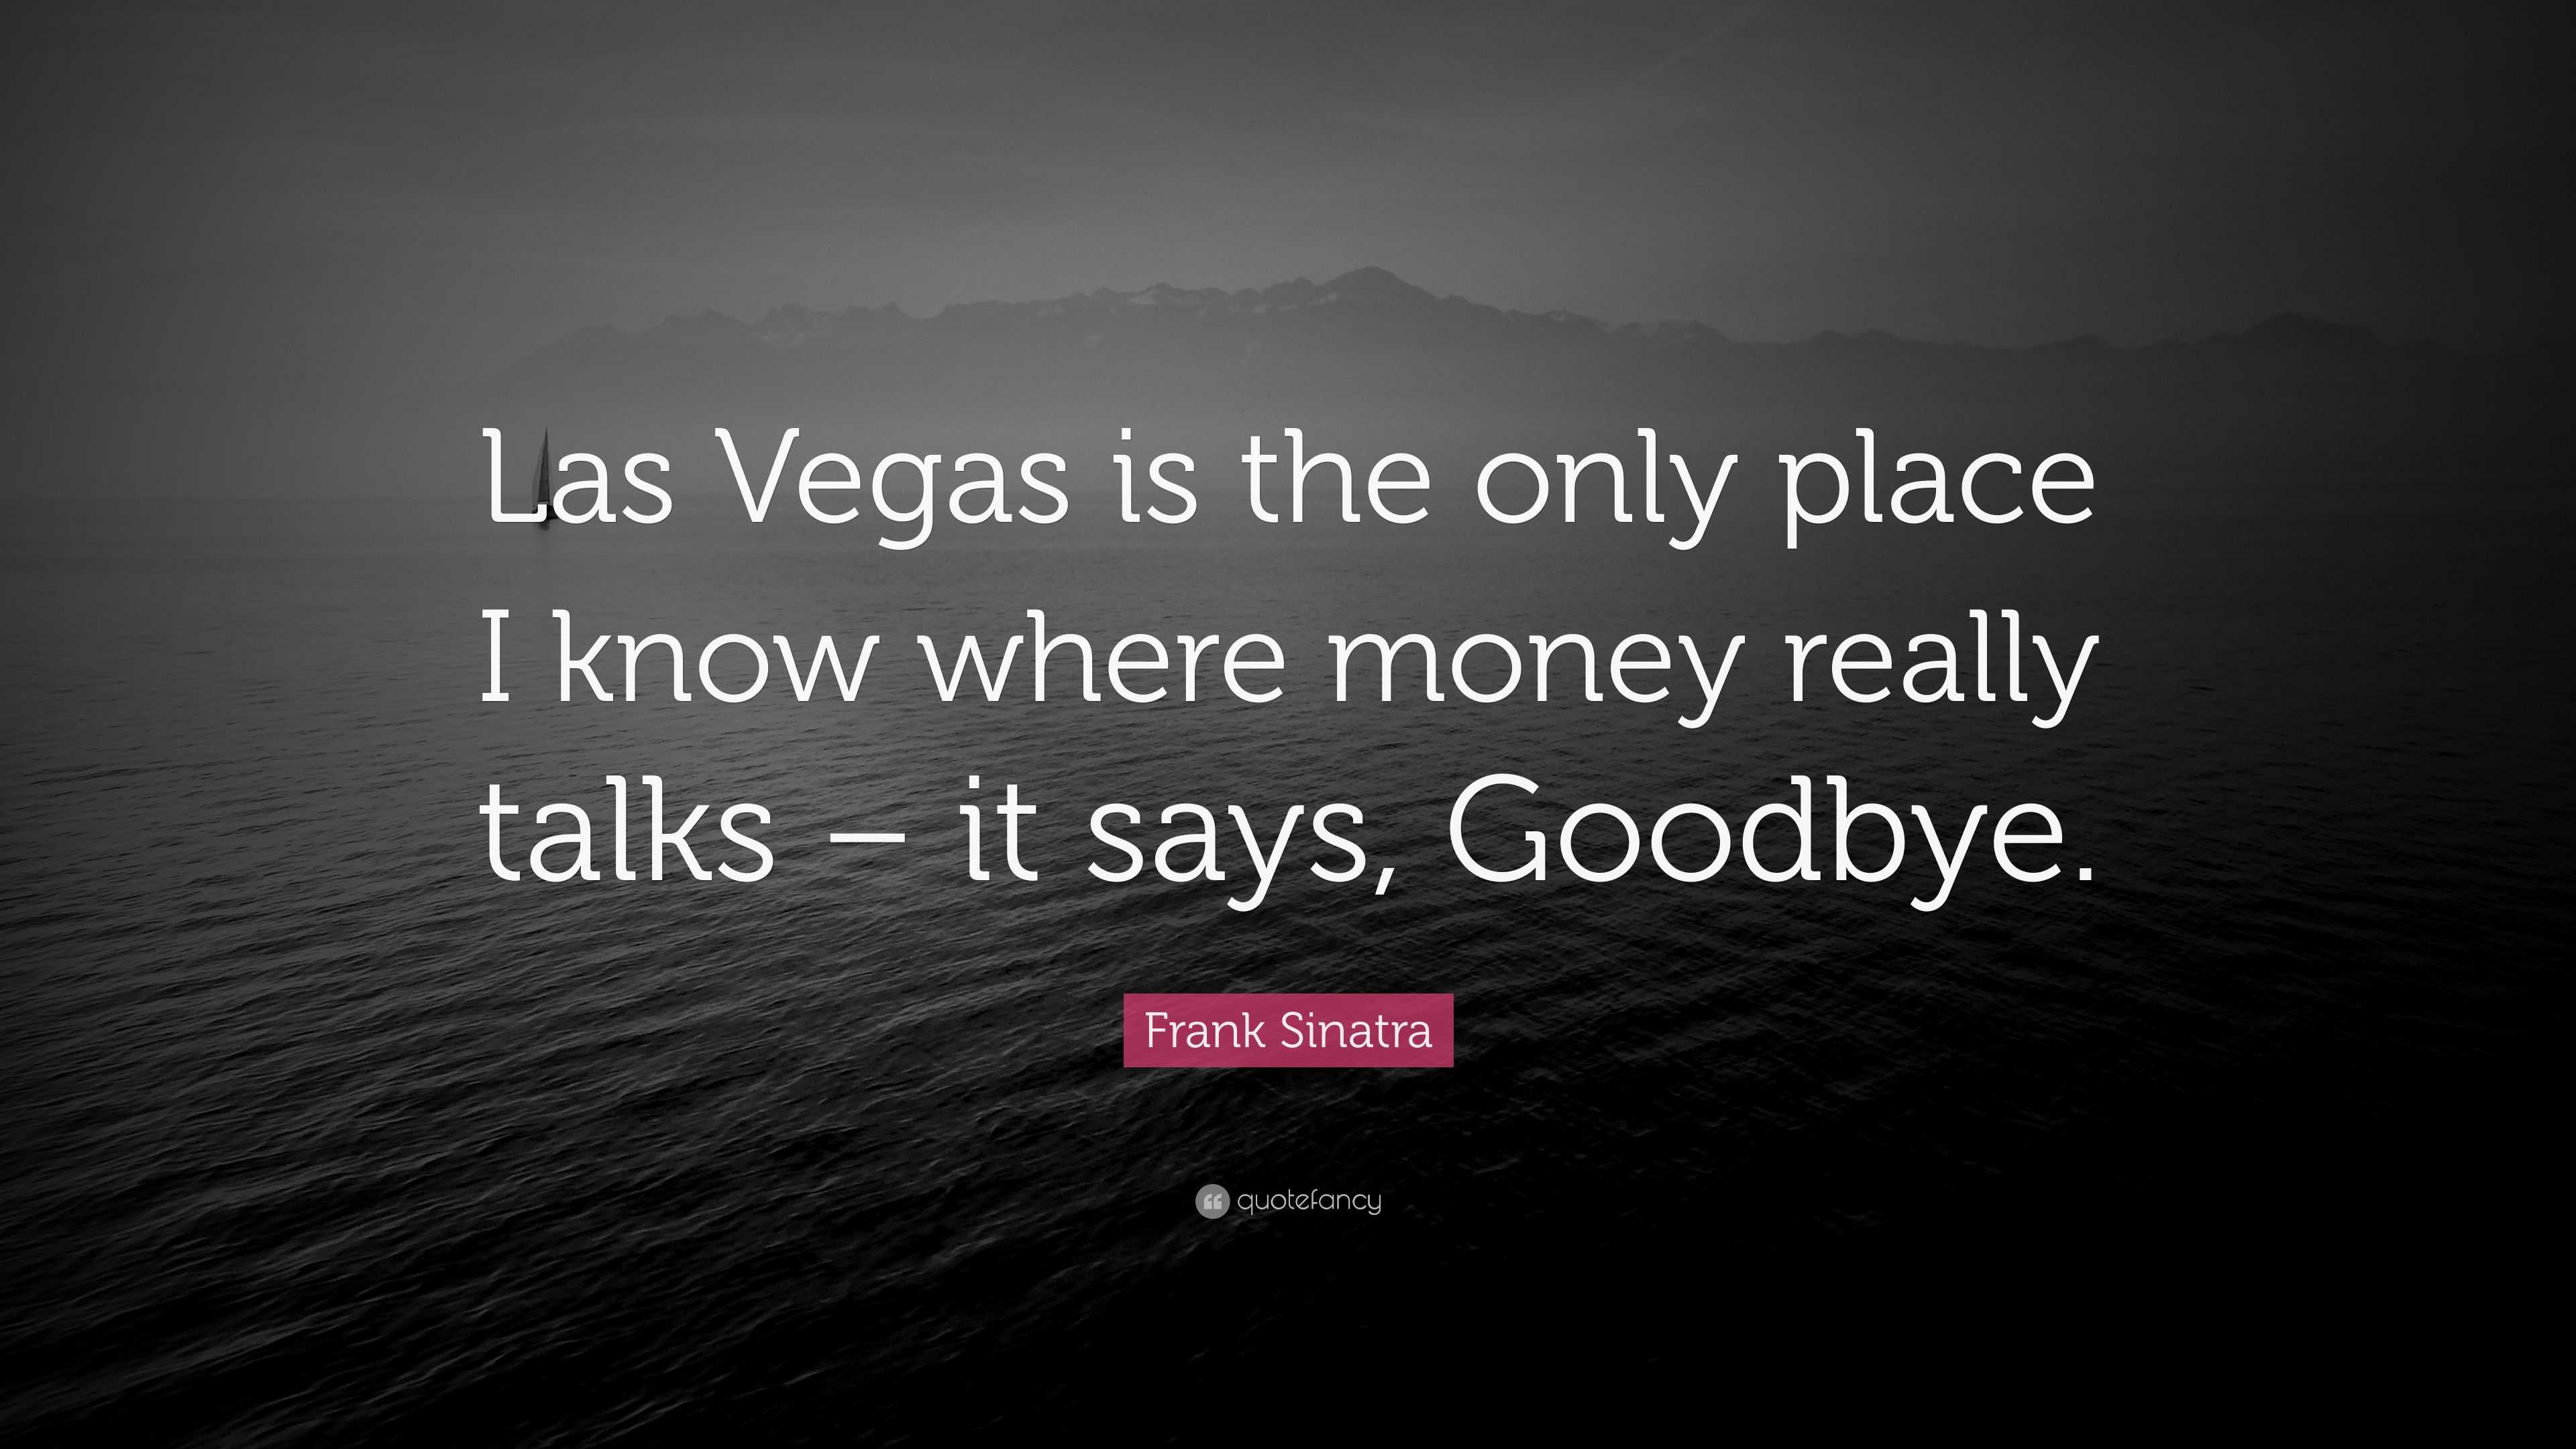 Frank Sinatra Quote: “Las Vegas is the only place I know where money